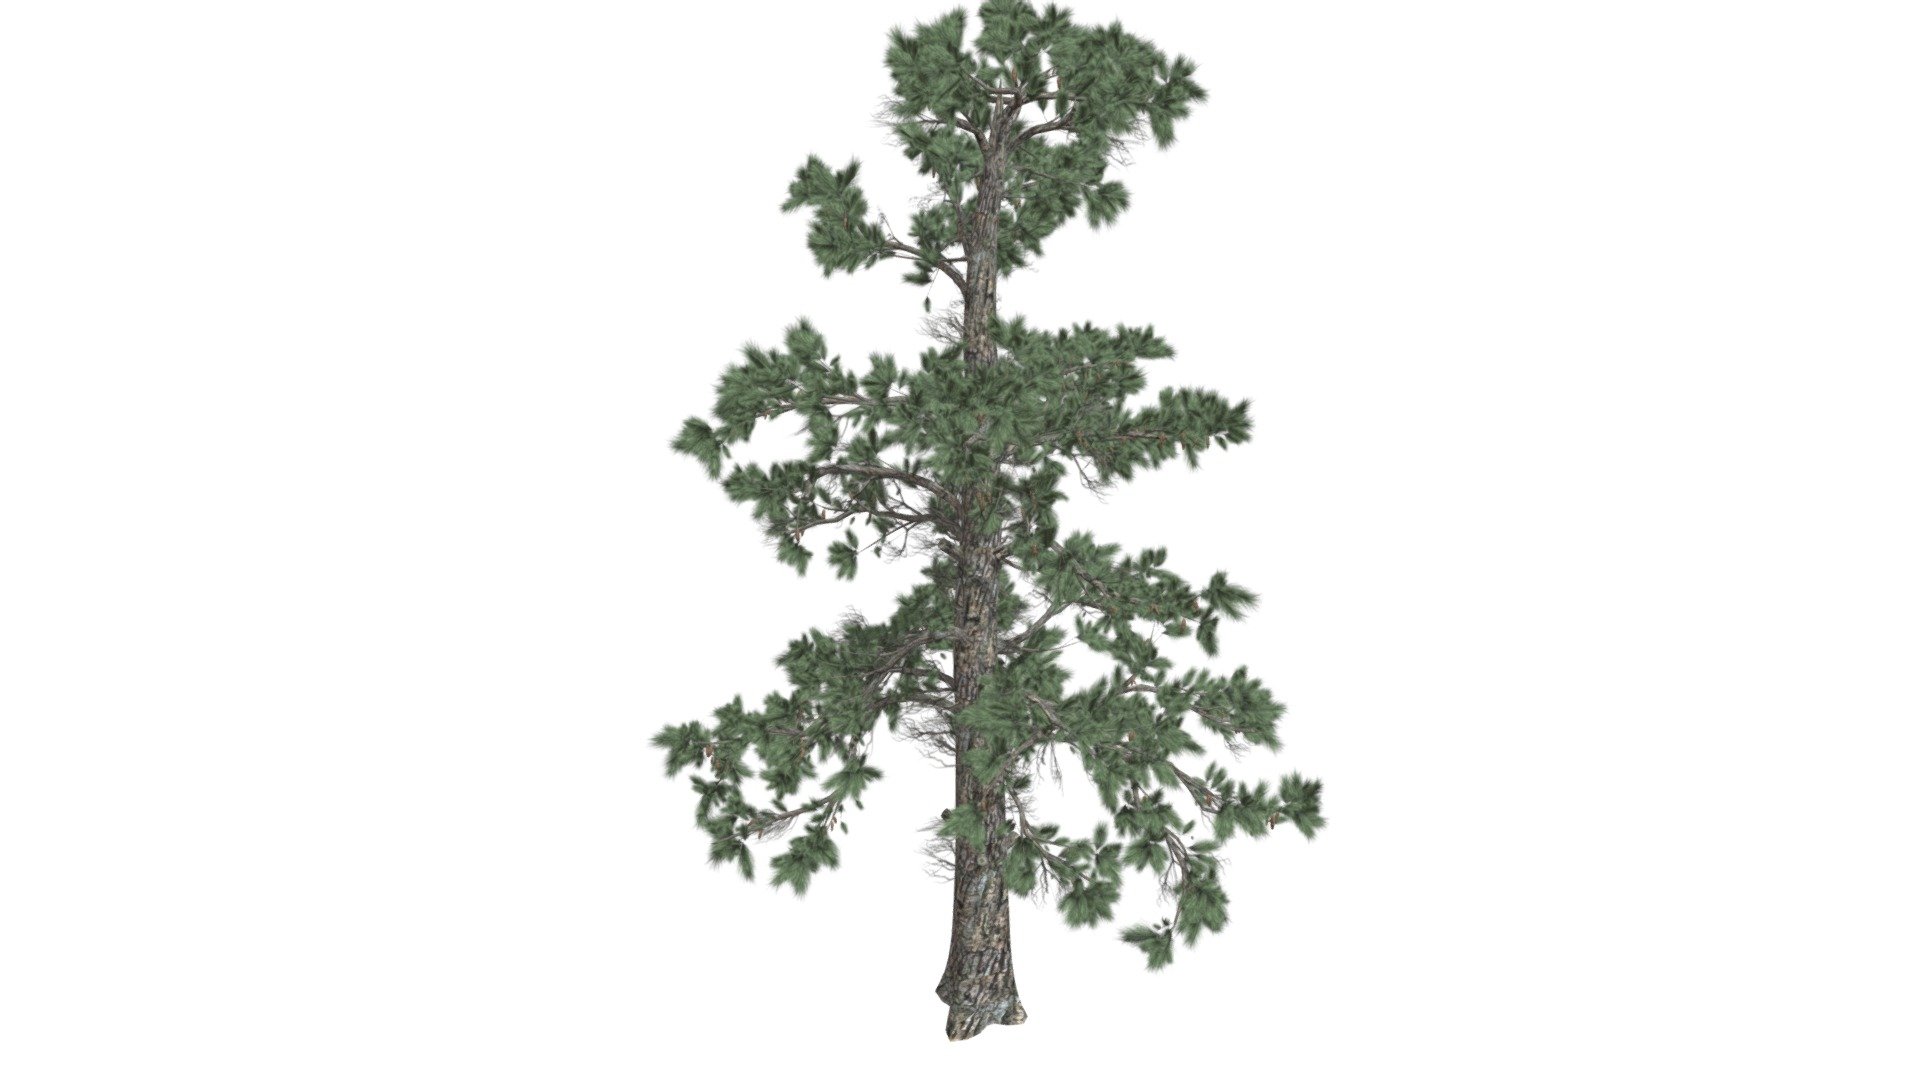 This 3D model of the Eastern White Pine Tree is a highly detailed and photorealistic option suitable for architectural, landscaping, and video game projects. The model is designed with carefully crafted textures that mimic the natural beauty of a real Eastern White Pine Tree. Its versatility allows it to bring a touch of realism to any project, whether it's a small architectural rendering or a large-scale landscape design. Additionally, the model is optimized for performance and features efficient UV mapping. This photorealistic 3D model is the perfect solution for architects, landscapers, and game developers who want to enhance the visual experience of their project with a highly detailed, photorealistic Eastern White Pine Tree 3d model